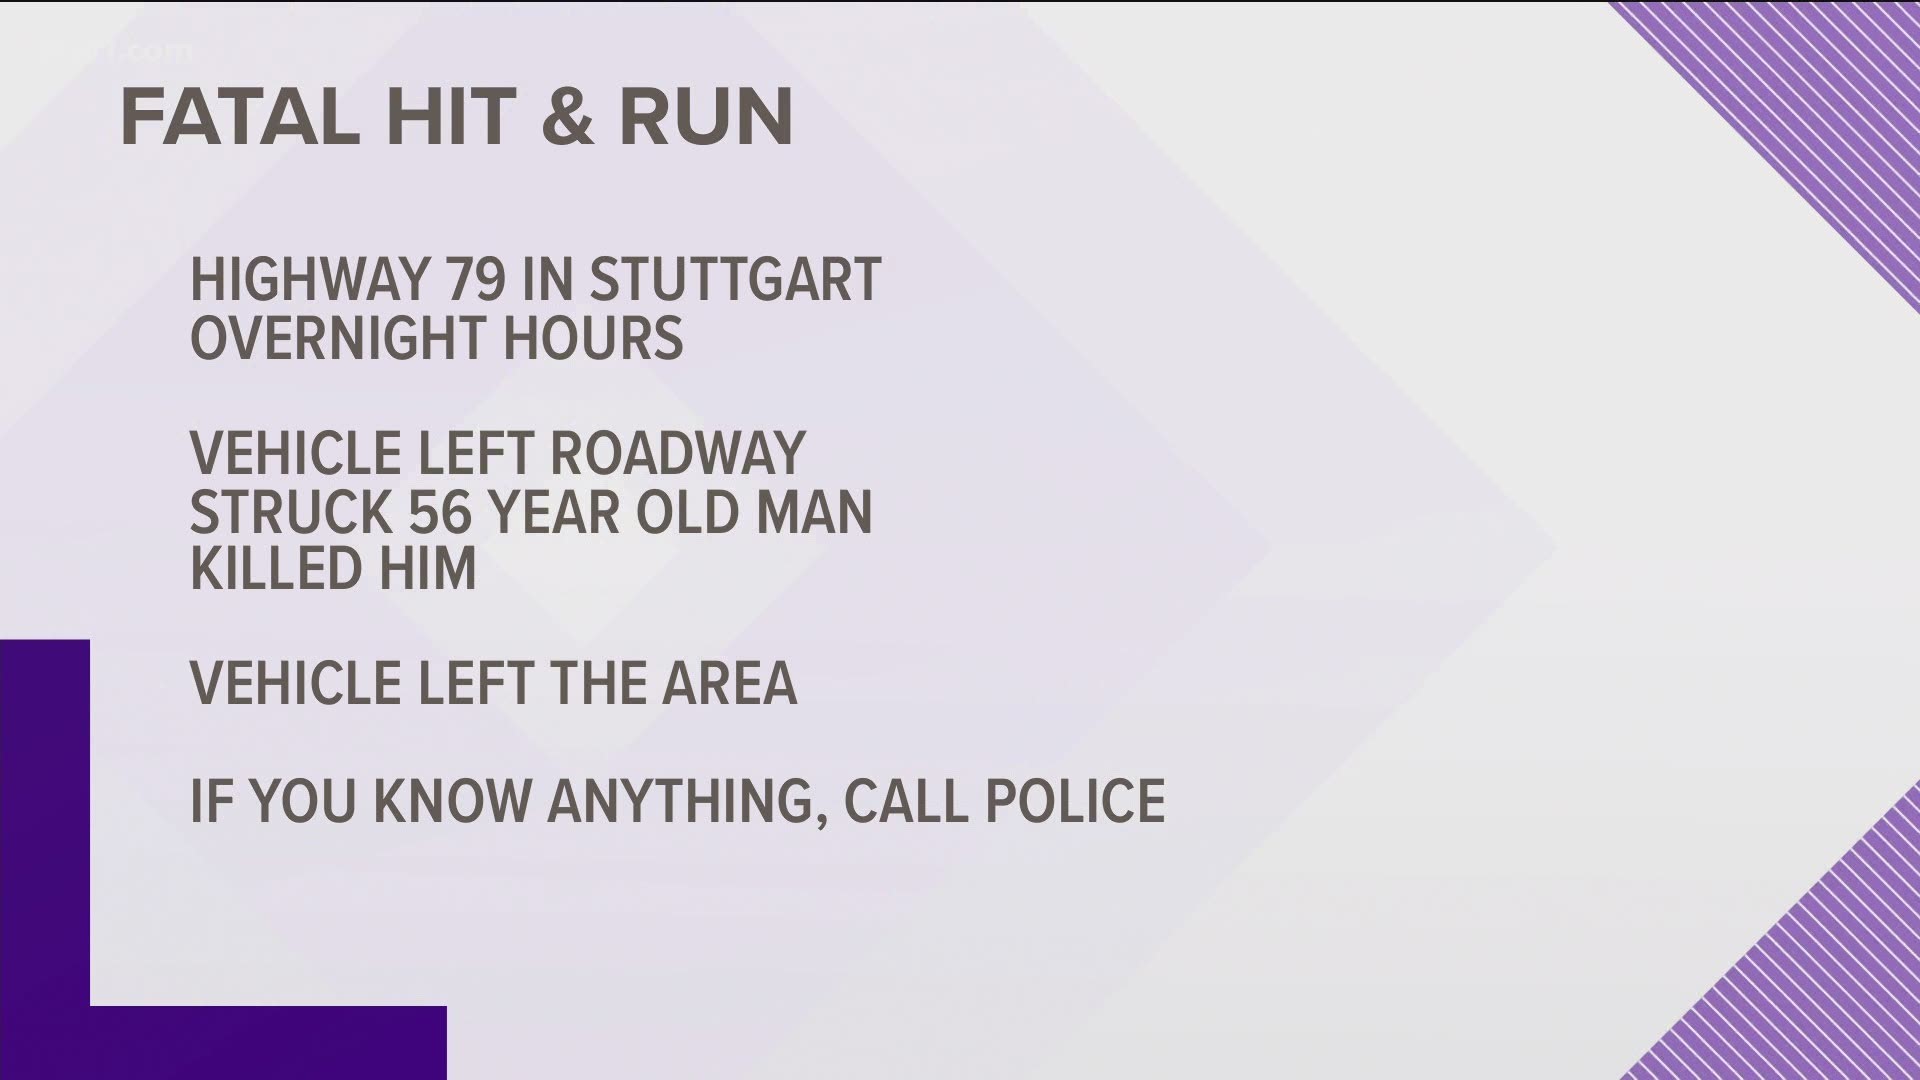 Stuttgart police are investigating after a man was hit by a car that left the scene.